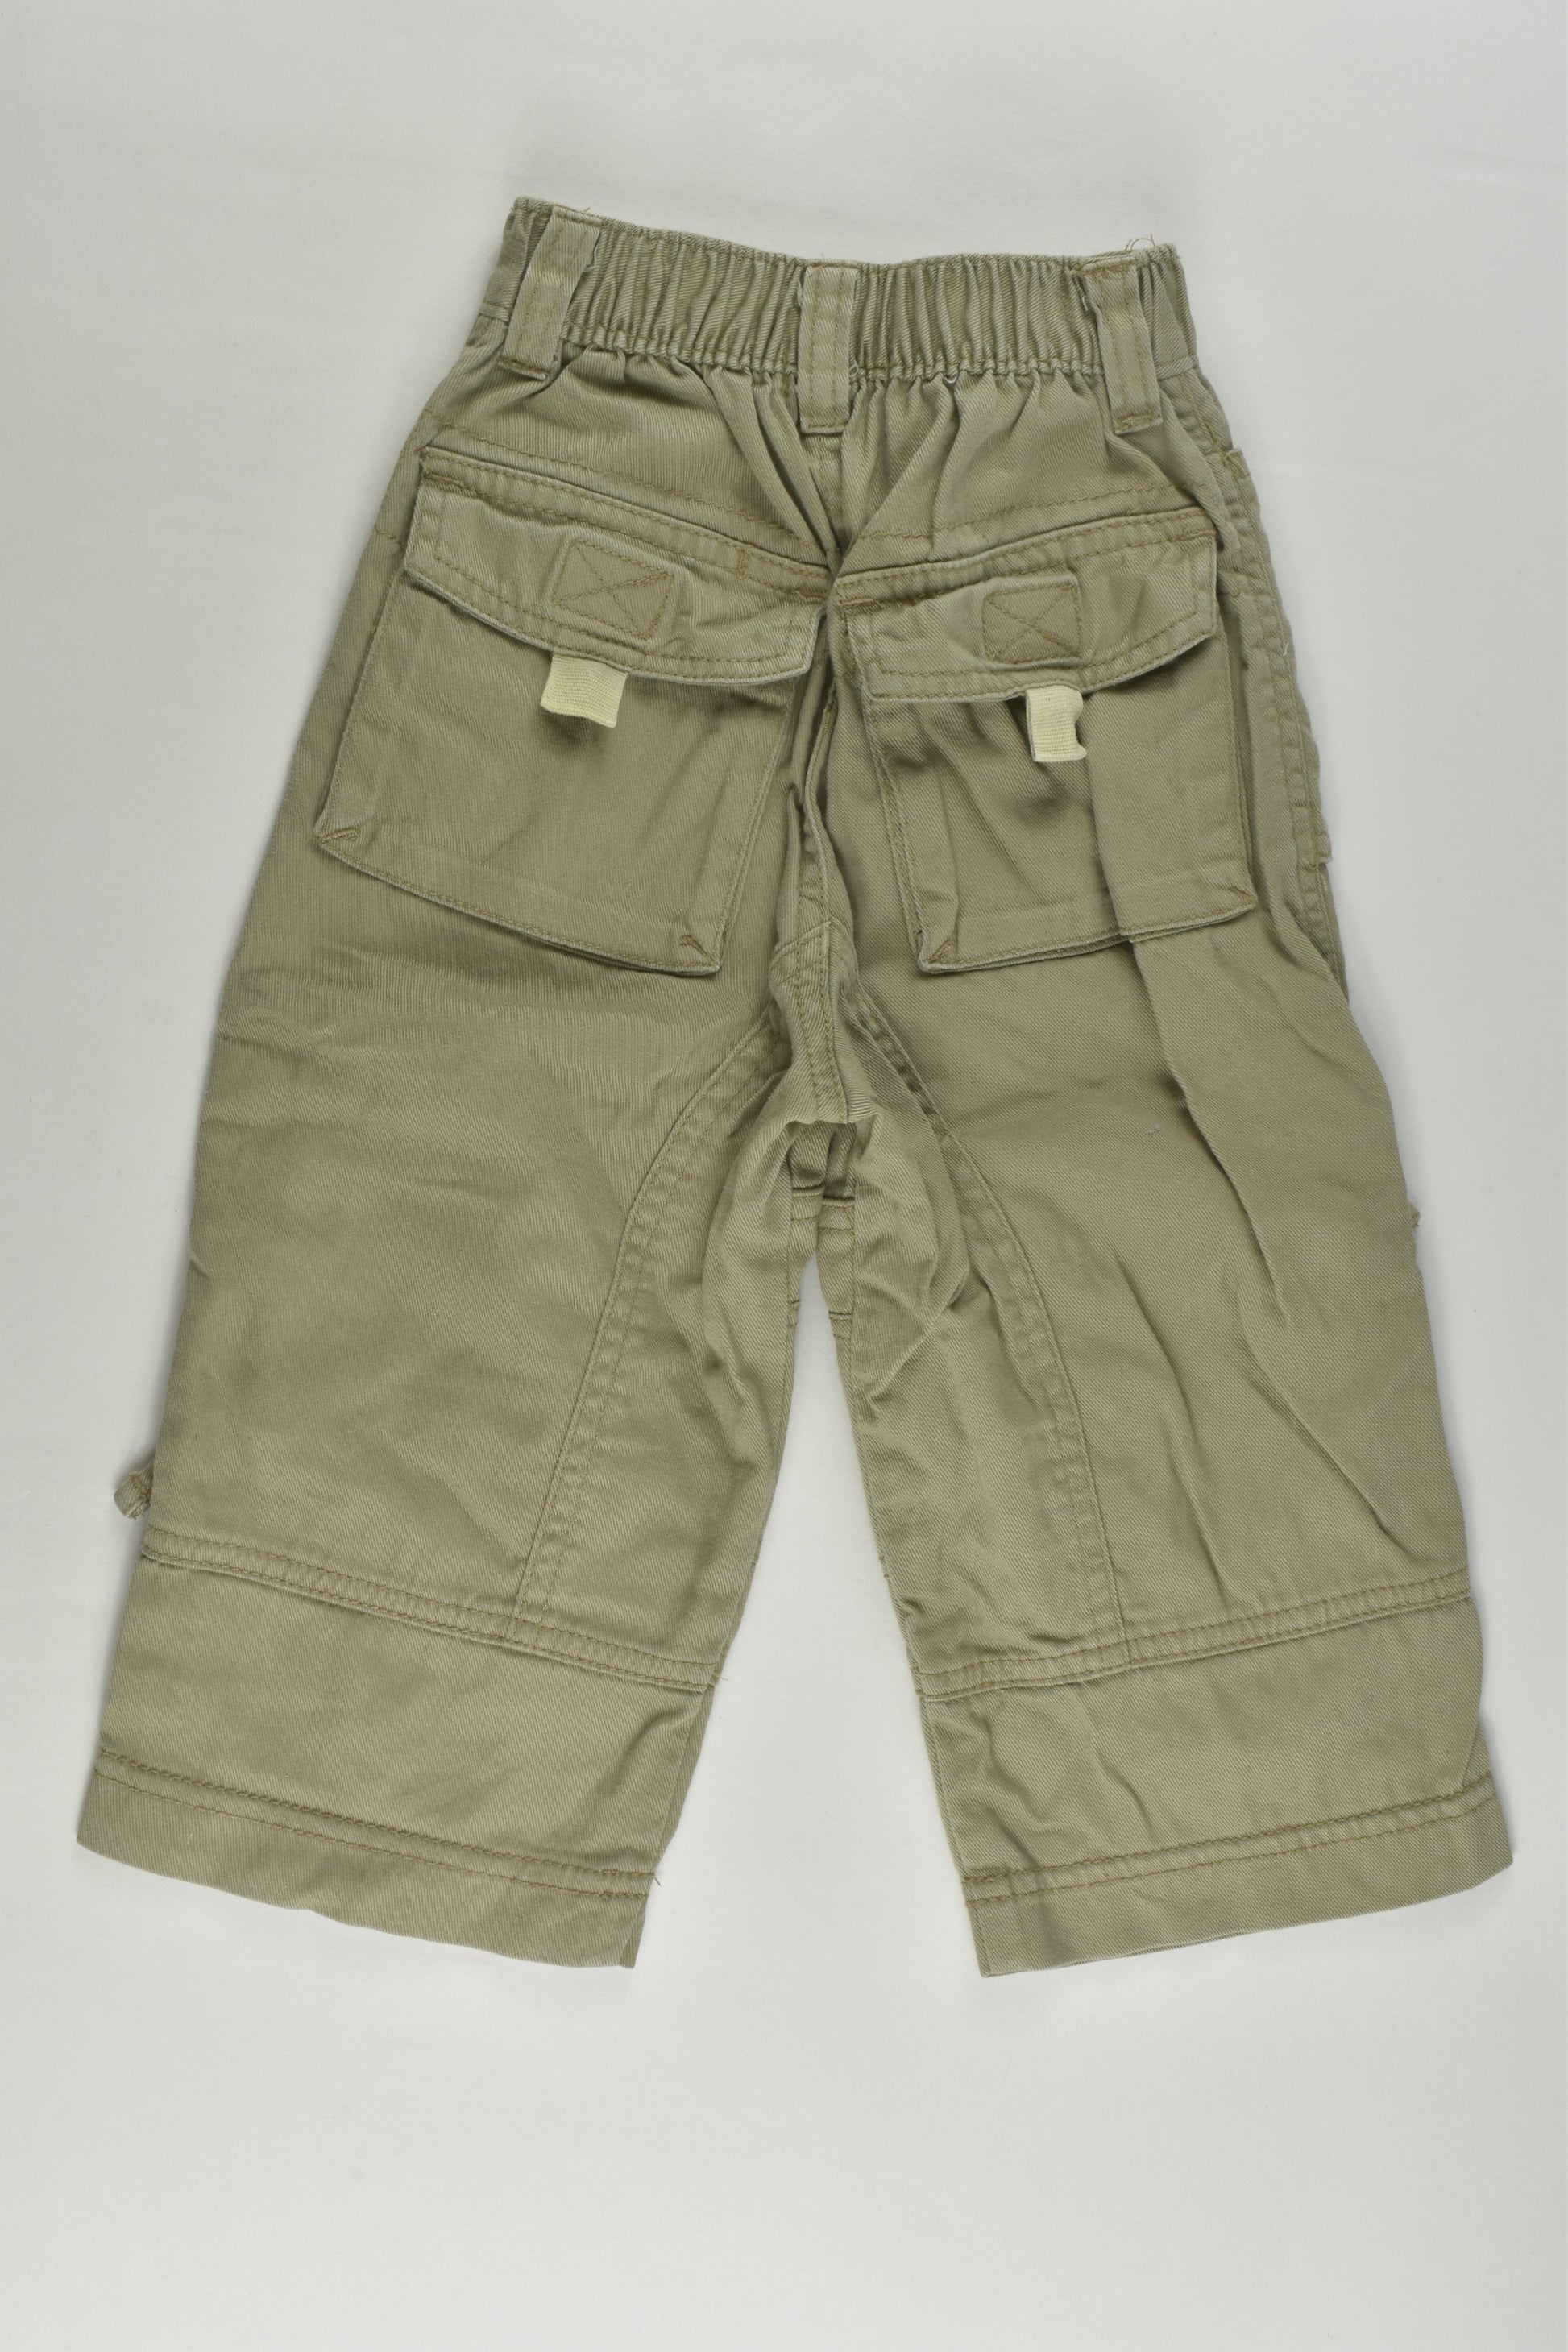 Papoose Size 2 Pants